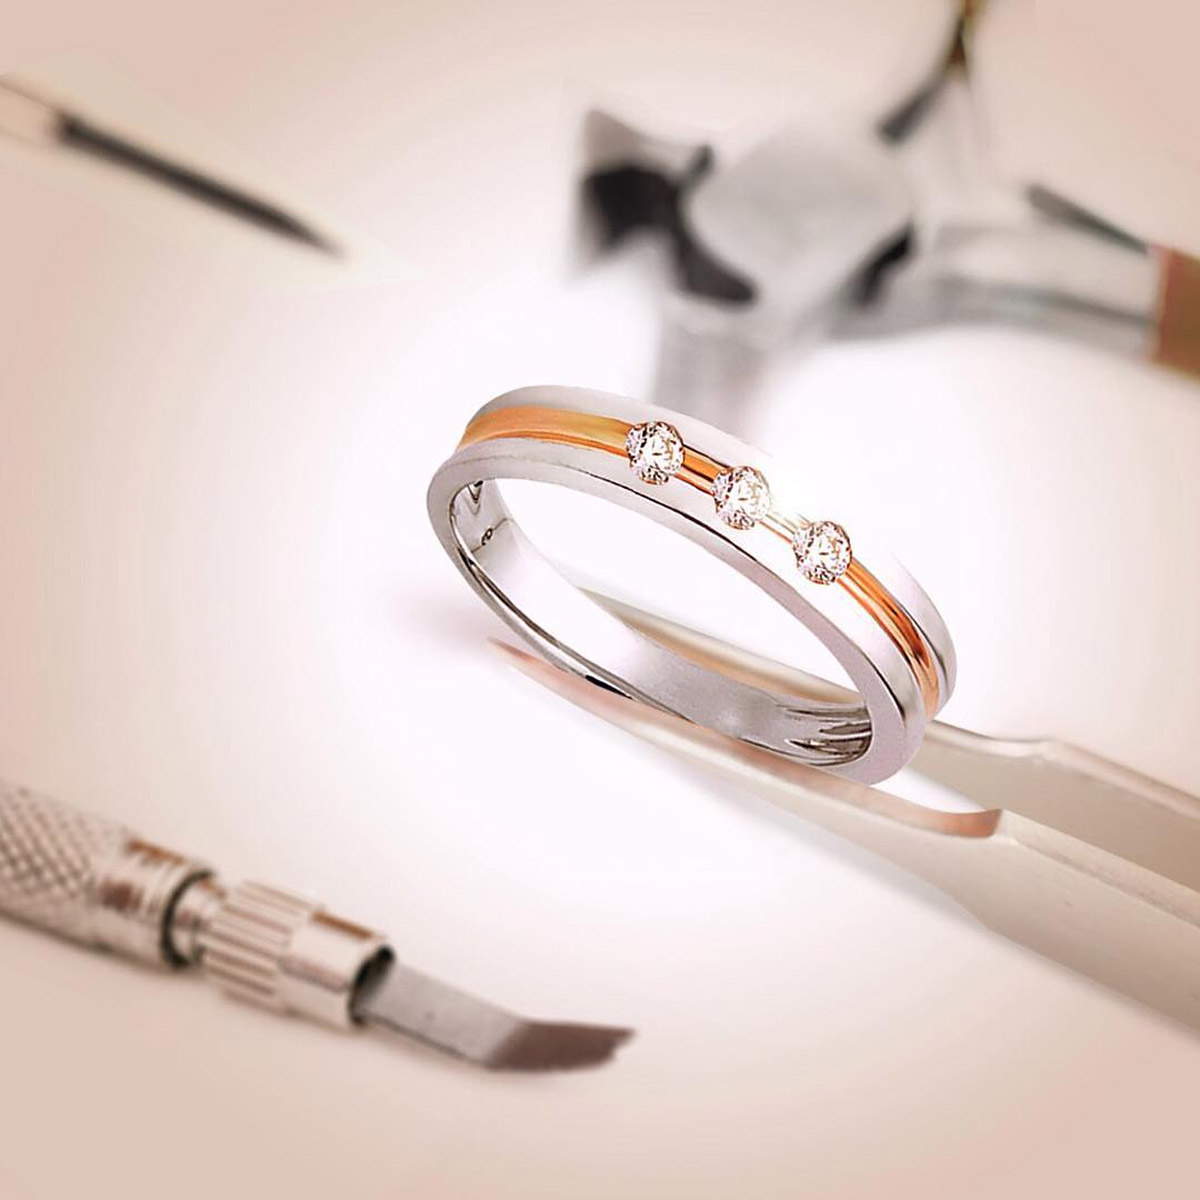 Looking for Wedding Bands? Here's Why Lee Hwa Jewellery Could be 